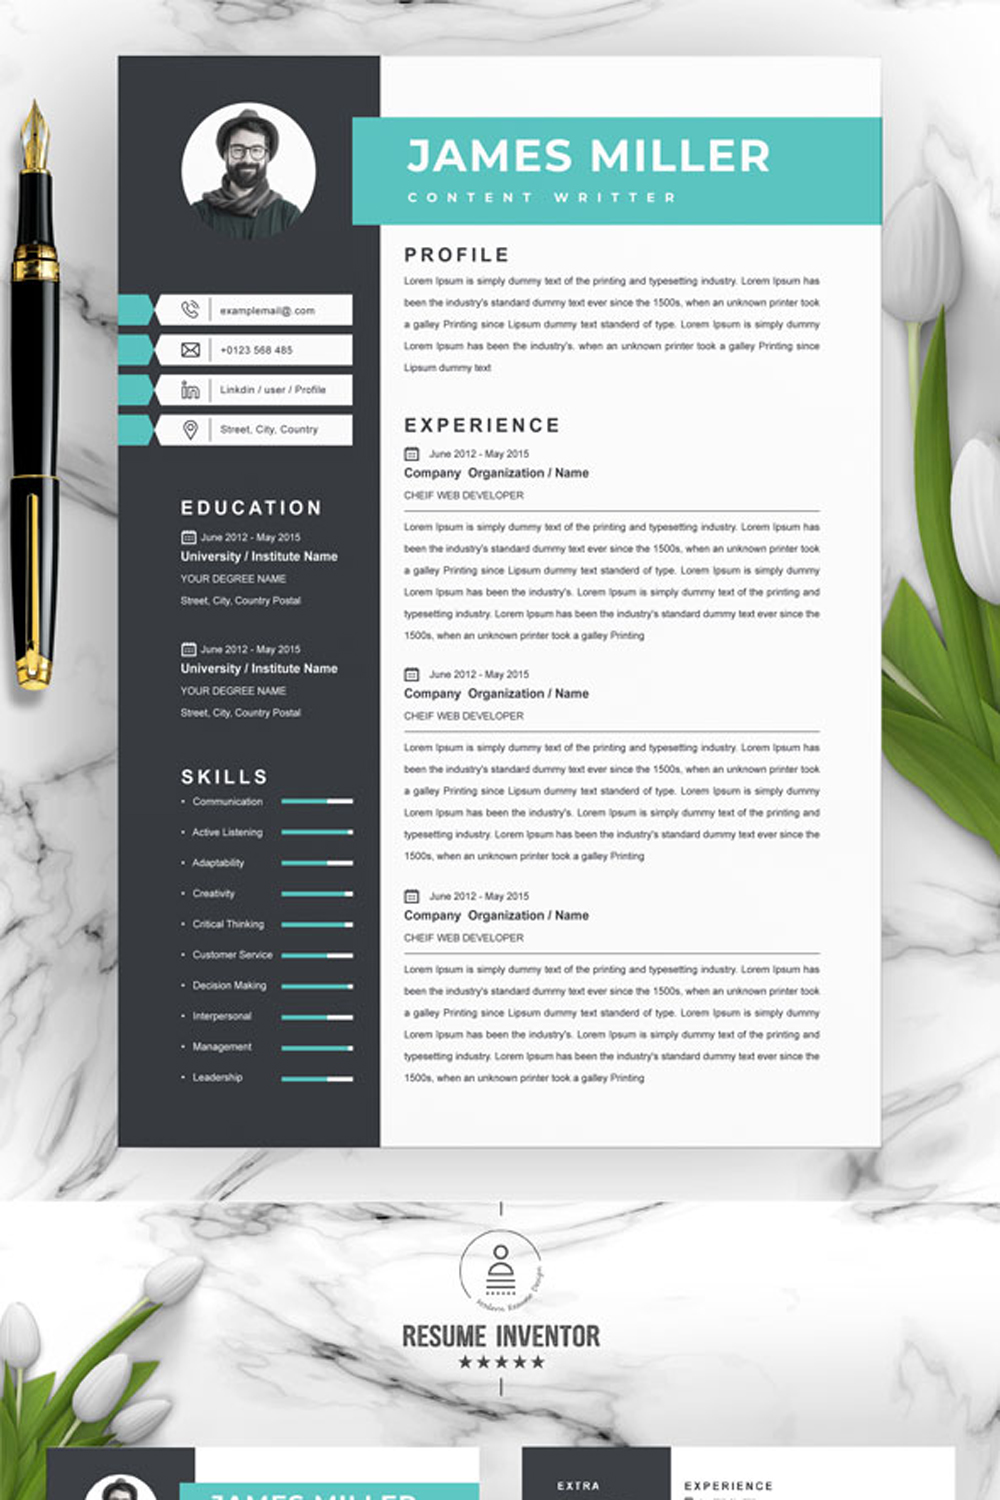 Content Writer Professional Resume Template | CV Template | Resume Template in Word PSD Format pinterest preview image.